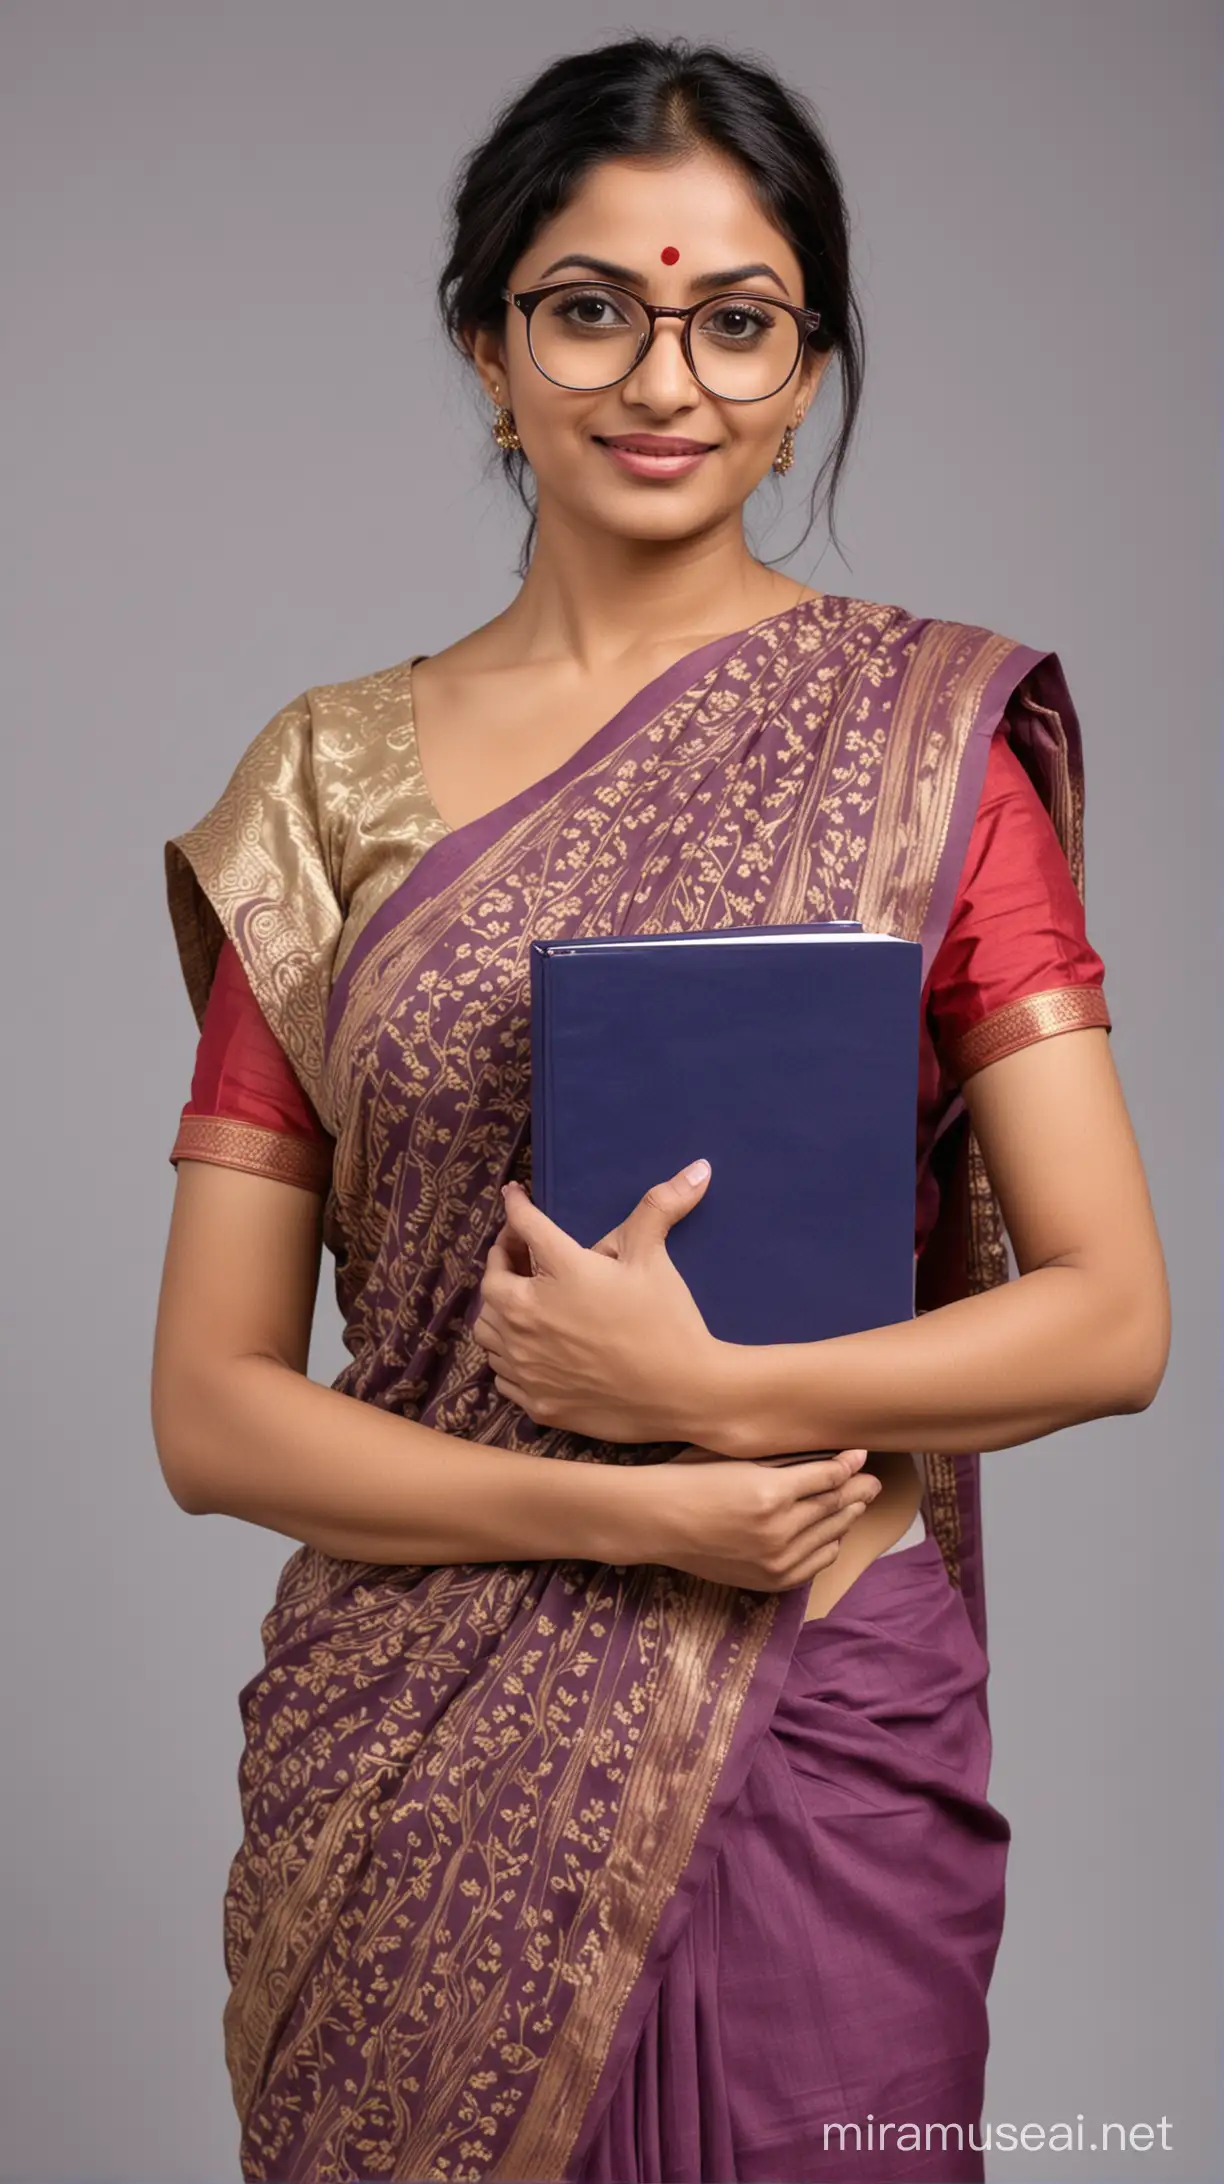 Indian Teacher in saree and eyeglasses  holding notebooks in hand standing face front 